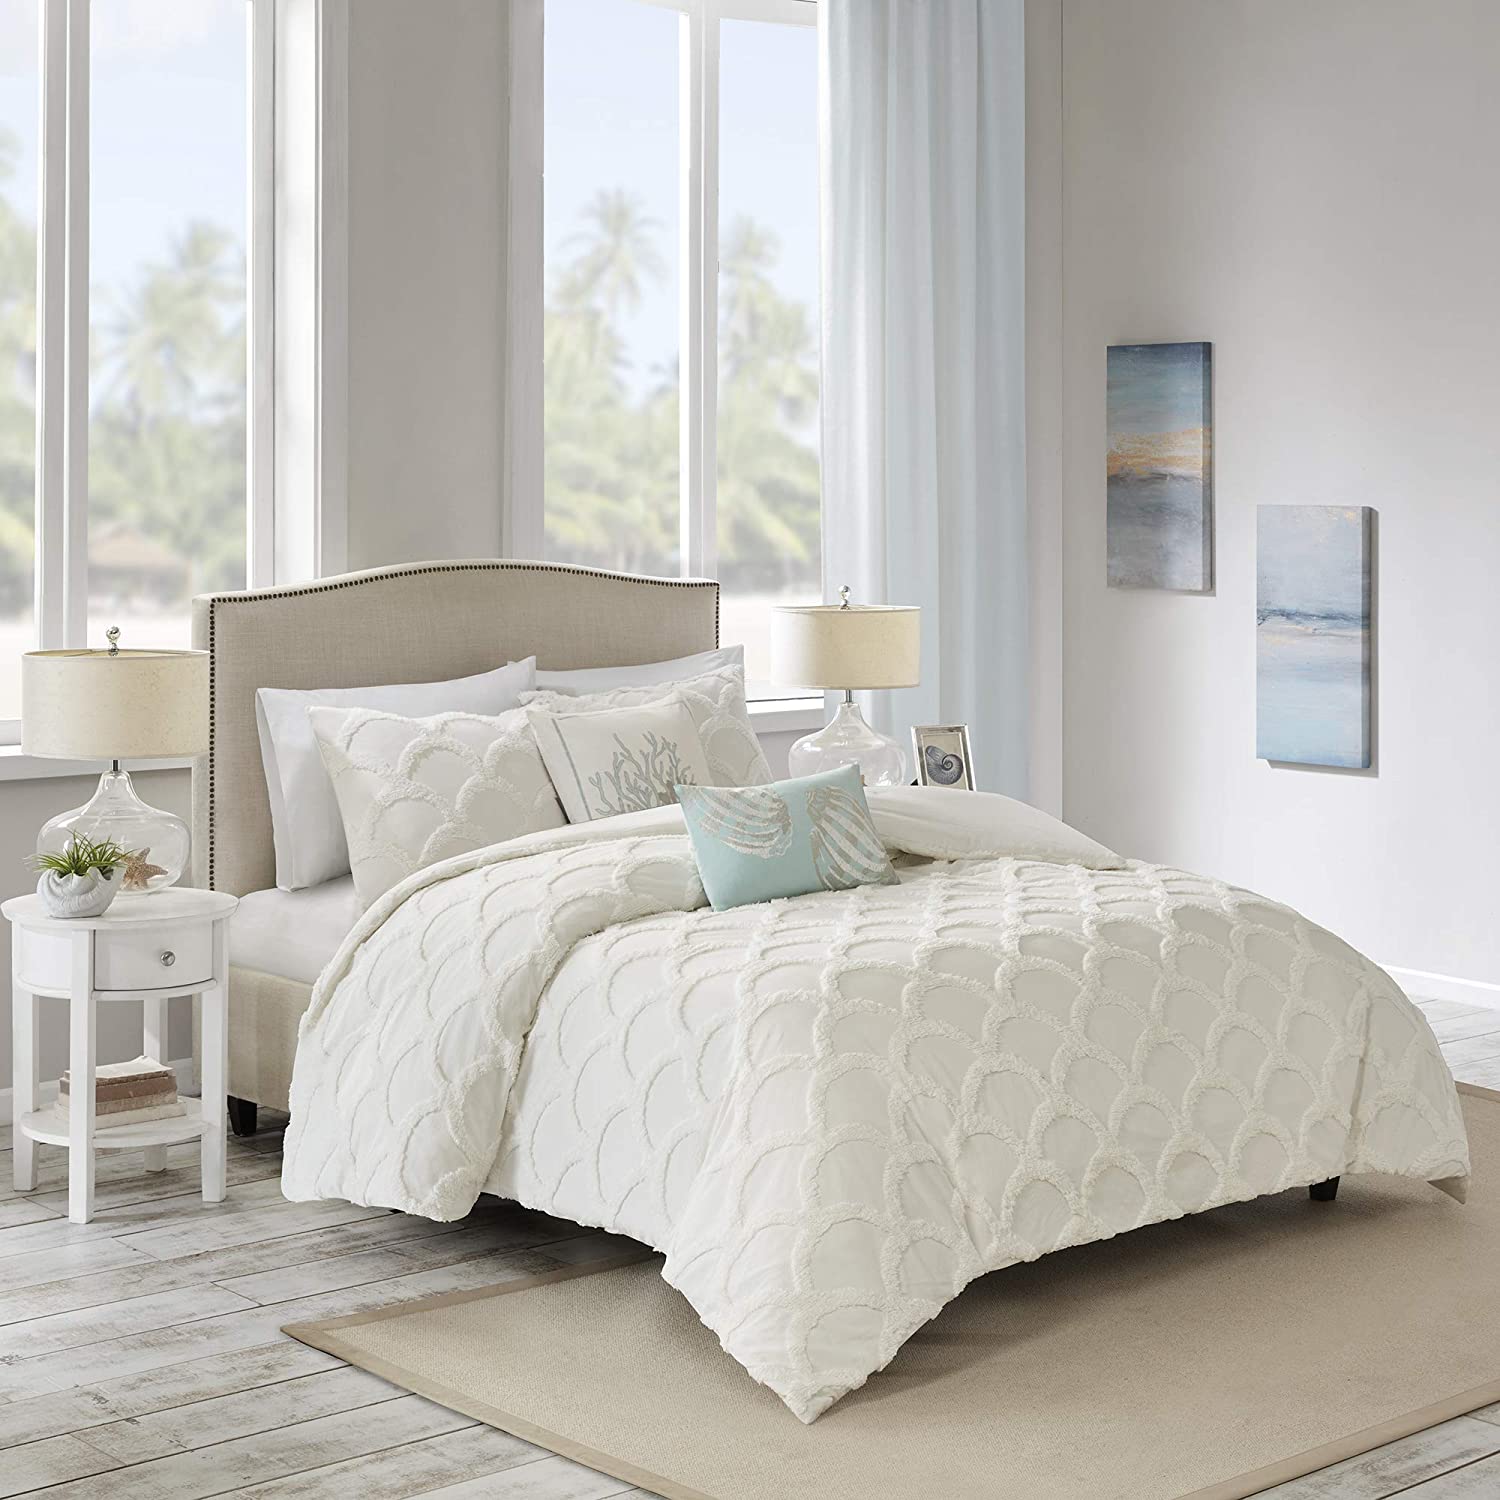 Harbor House Cannon Beach King Size Bed Comforter Set - Ivory, Mermaid Scale Tufted Chenille ‚Äì 3 Pieces Bedding Sets ‚Äì 100% Cotton Bedroom Comforters,White,King/Cal King(110&#34;x96&#34;)